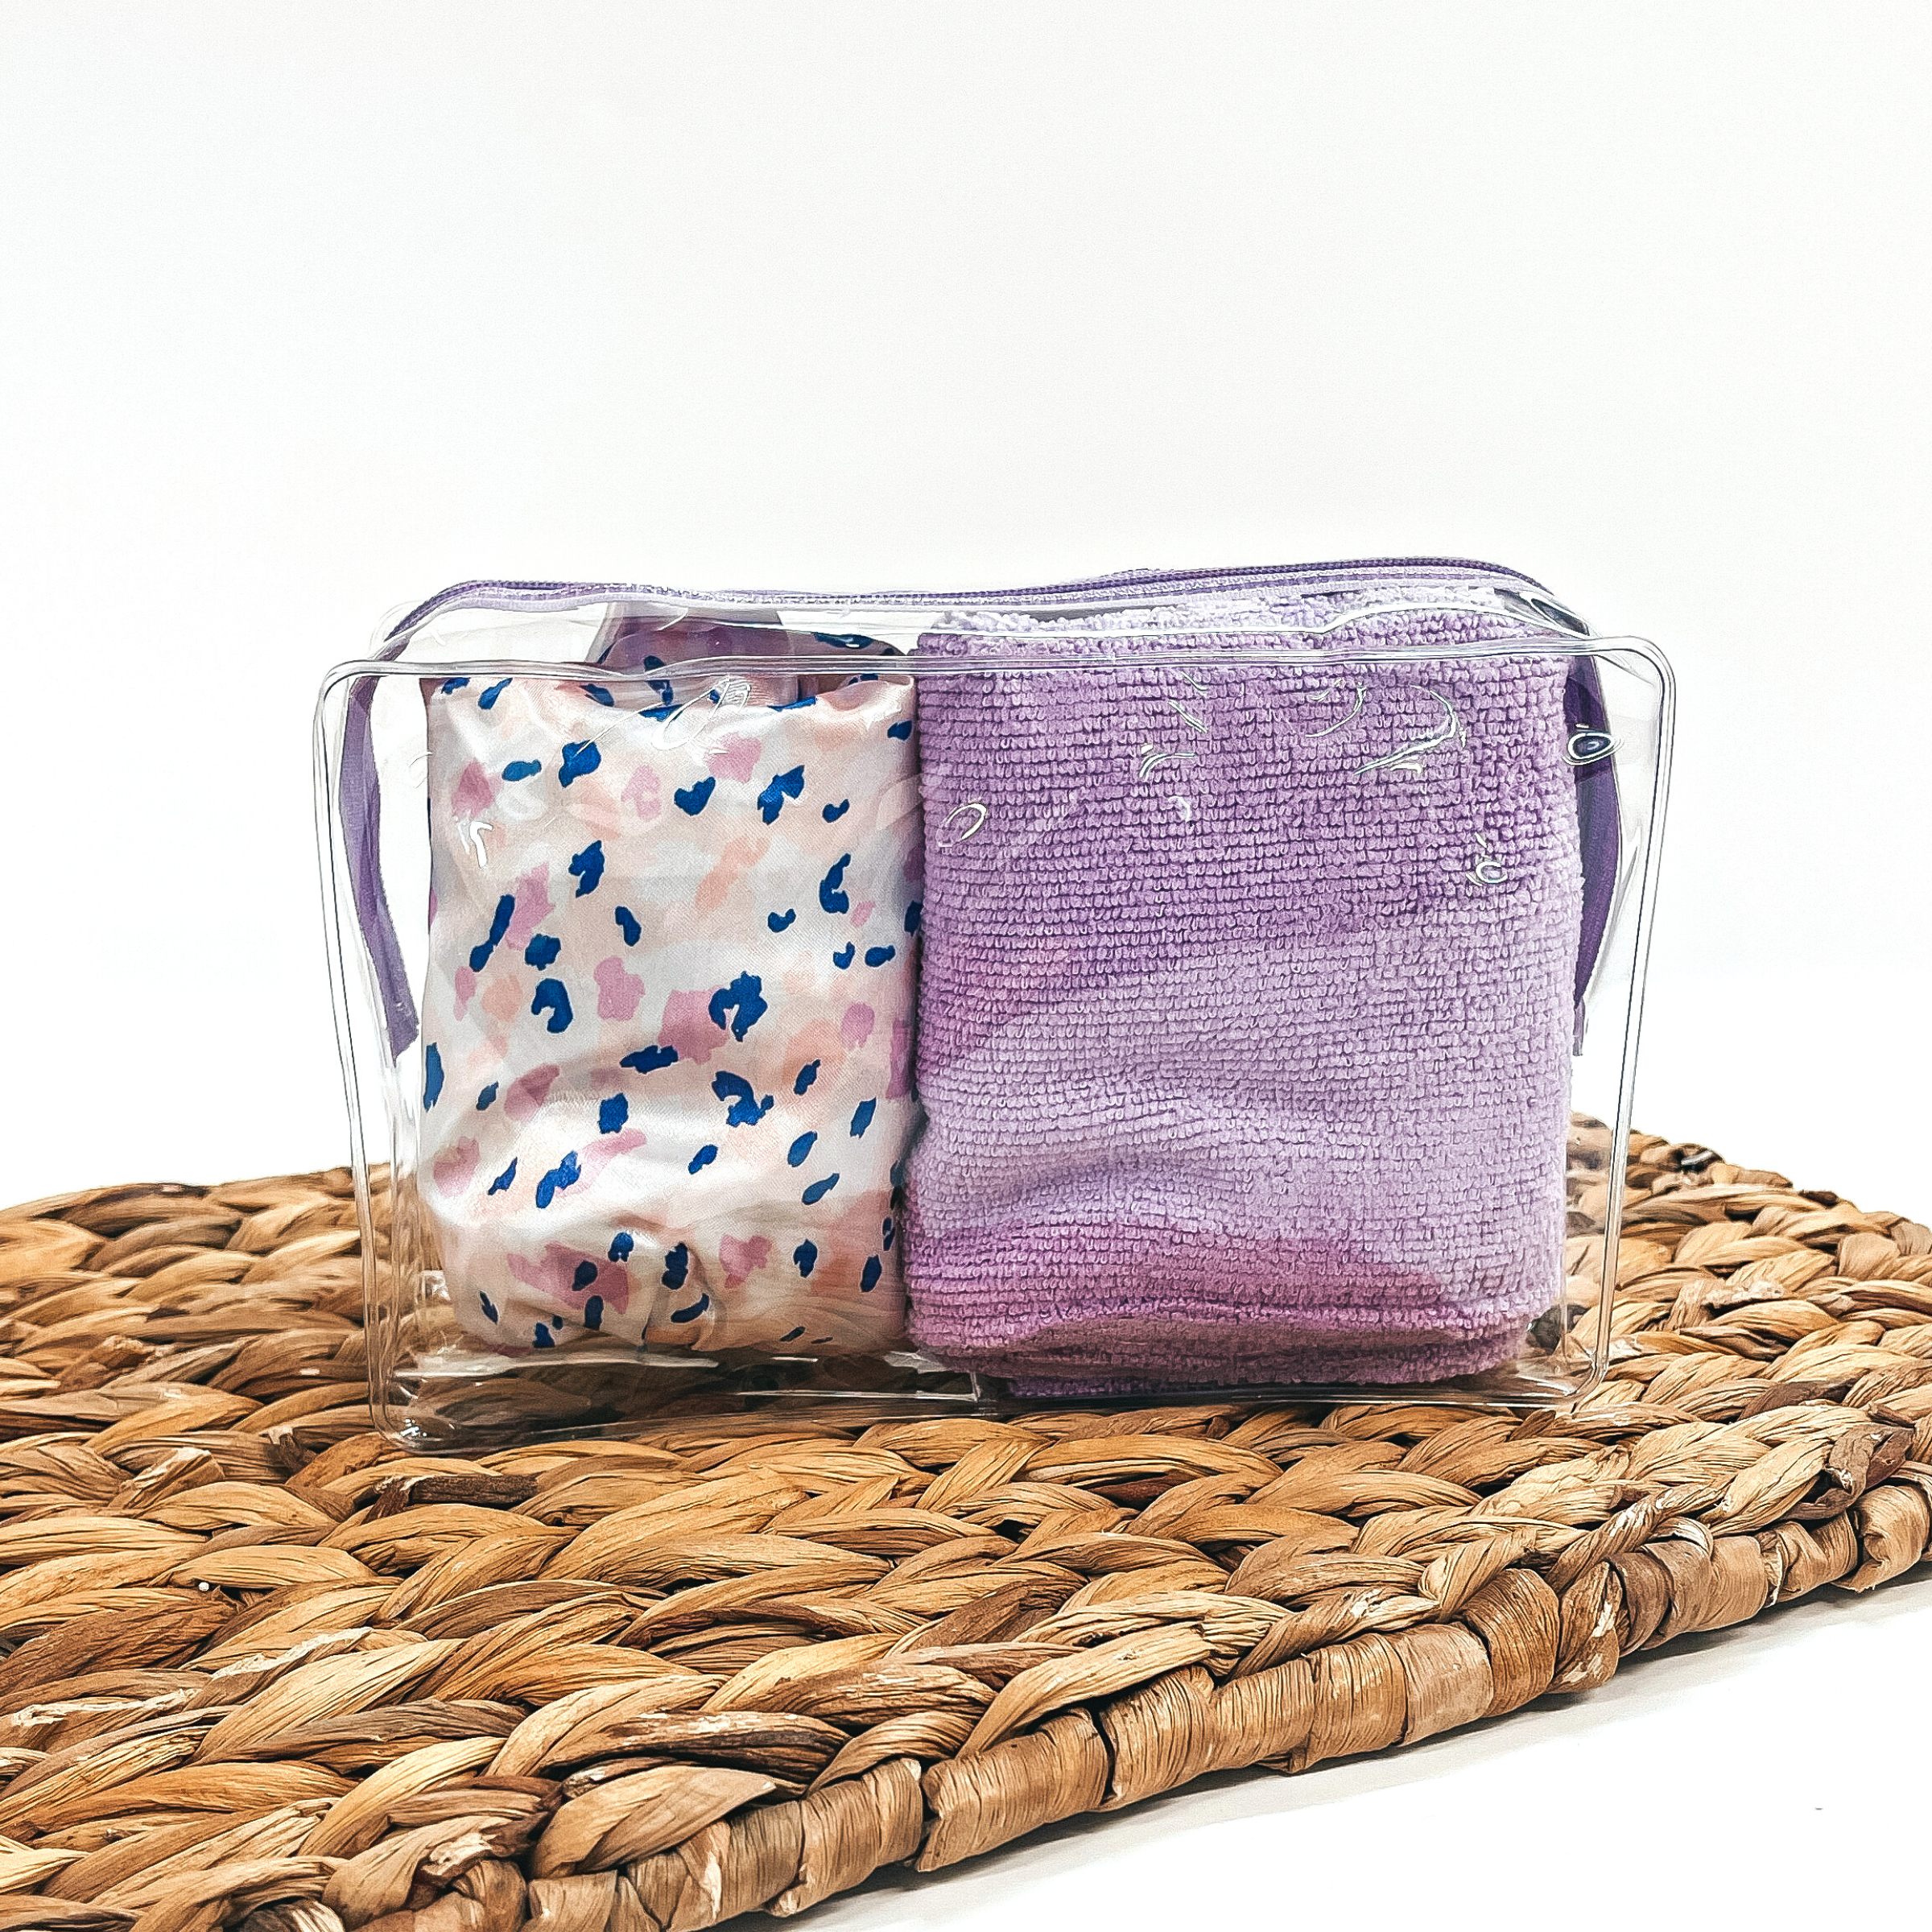 This is a clear bag with a purple lavender zipper, inside the bag there is a pink and  purple leopard shower cap and a purple hair turban. This bag is laying on a brown  woven slate and on a white background.